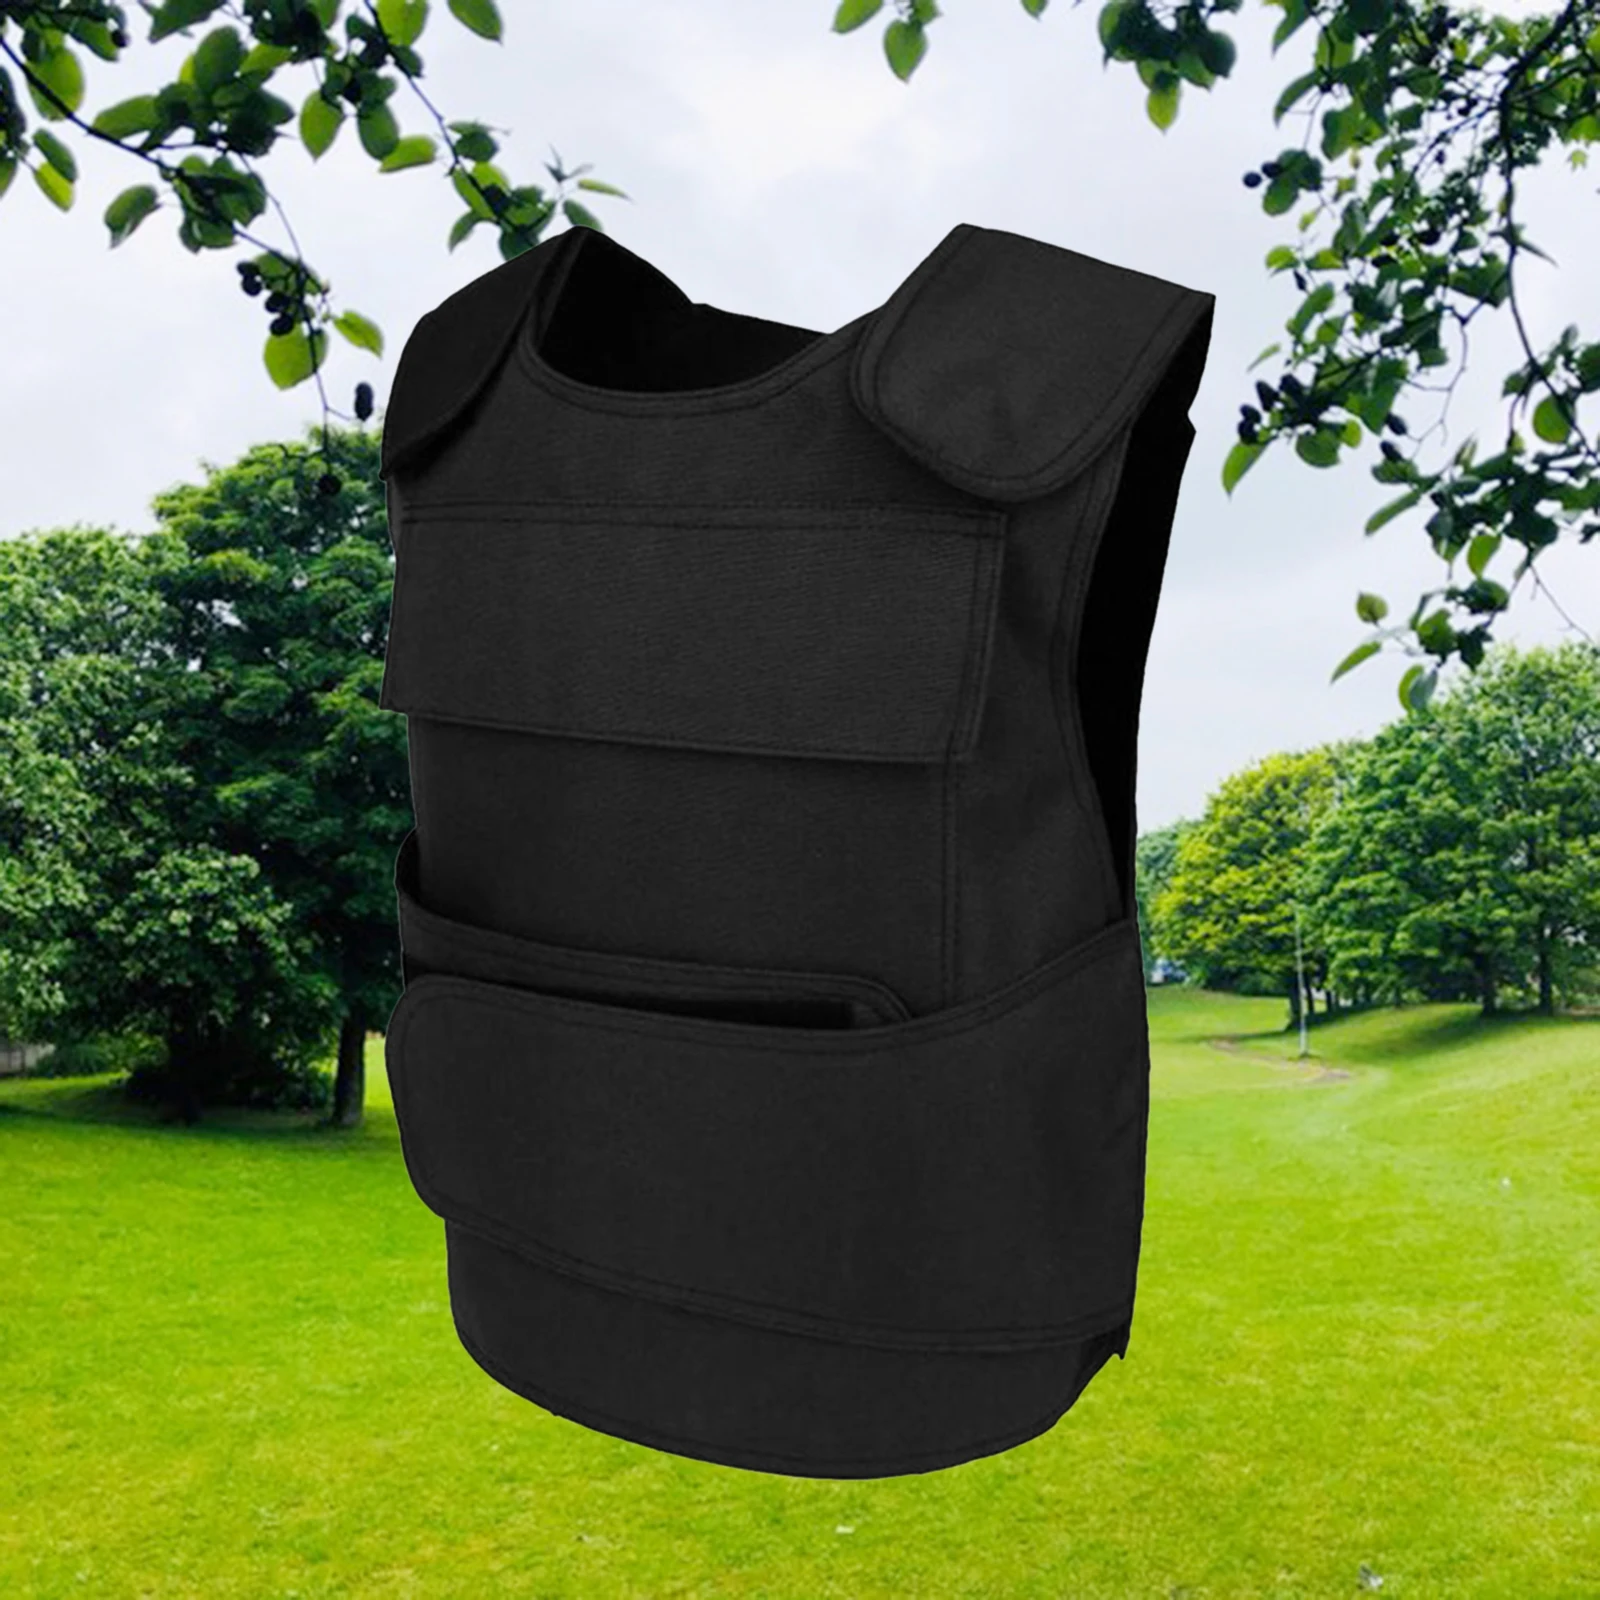 Utility Nylon Tactical Vest Outdoor Gaming Modular Plate Carrier Game Training Lightweight Vests Safety Hunting for Adults